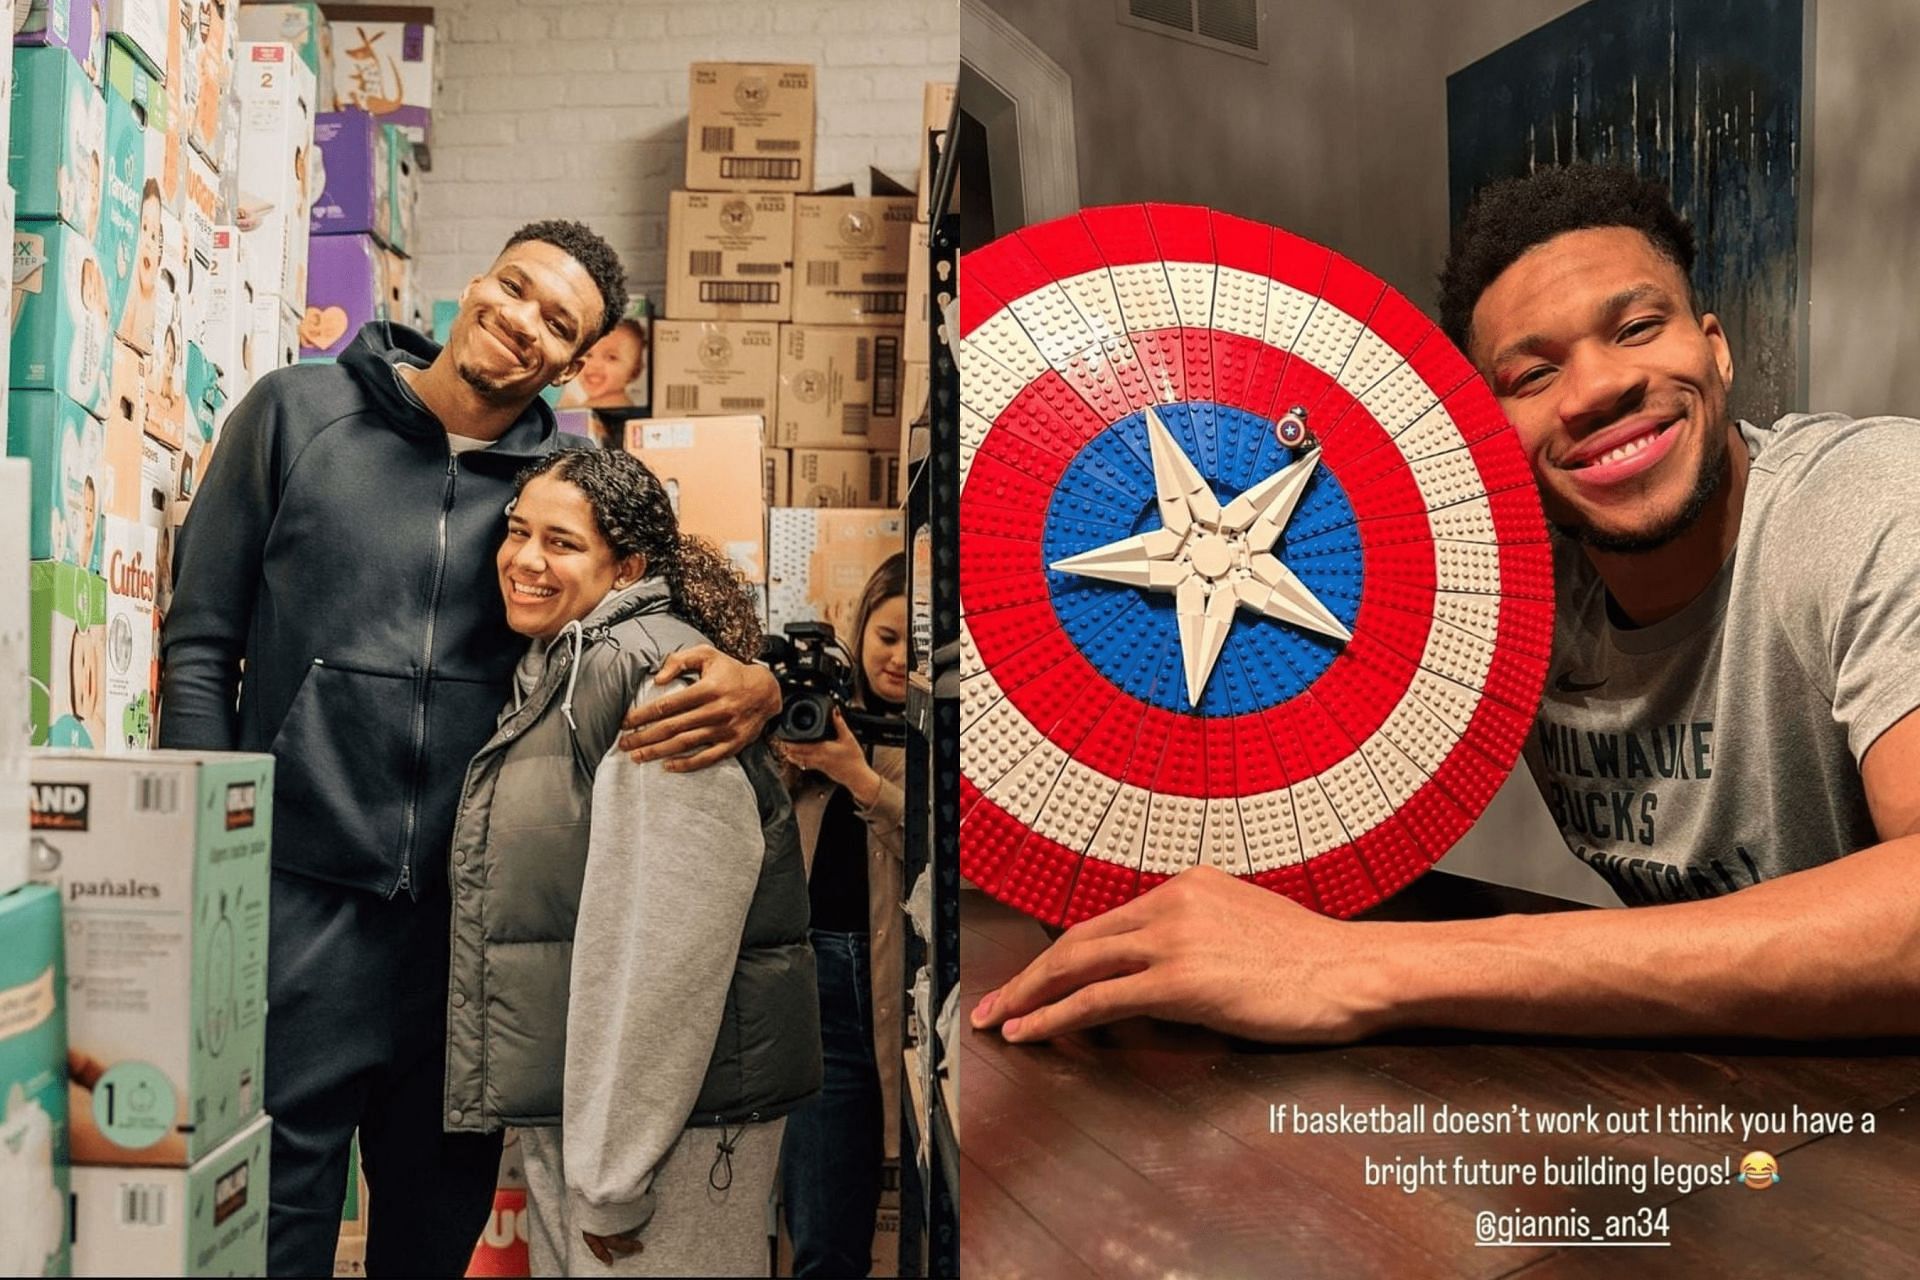 &ldquo;Bright future building legos&rdquo;: Giannis Antetokounmpo&rsquo;s fiancee Mariah Riddlesprigger hilariously roasts 2x MVP amid bed-ridden hobbies